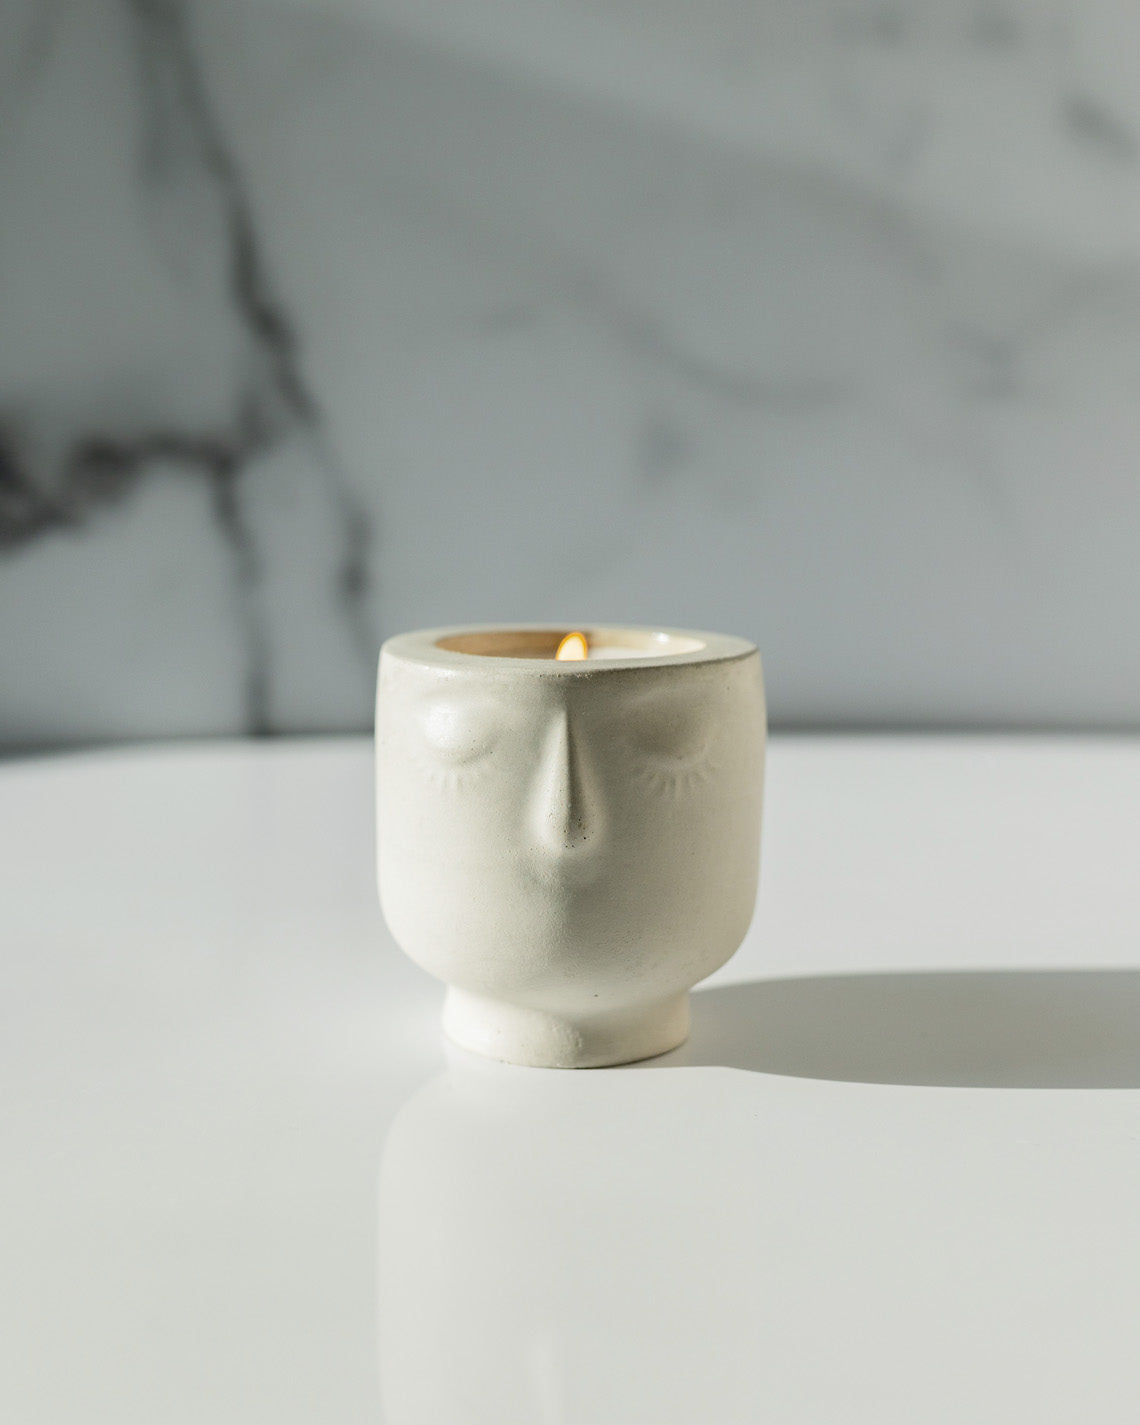 Mojave Dreams Coconut Soy Candle -  Modern Face Vessel